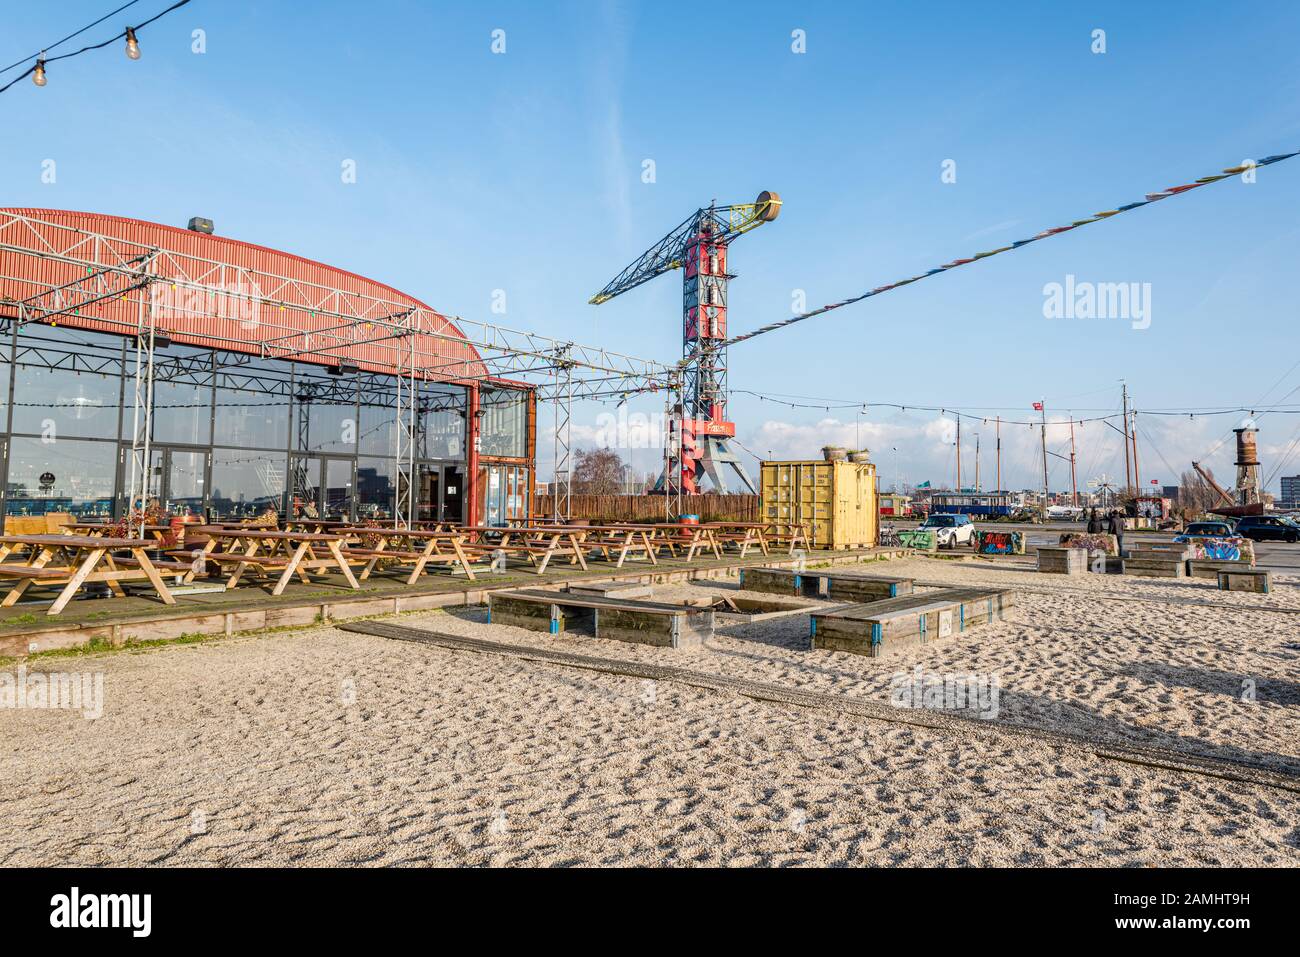 Holland, Januari 2020, Amsterdam, colorfull scenes at the NDSM werf with its cranes and grafiti in the north of Amsterdam near the ij in the river Ams Stock Photo